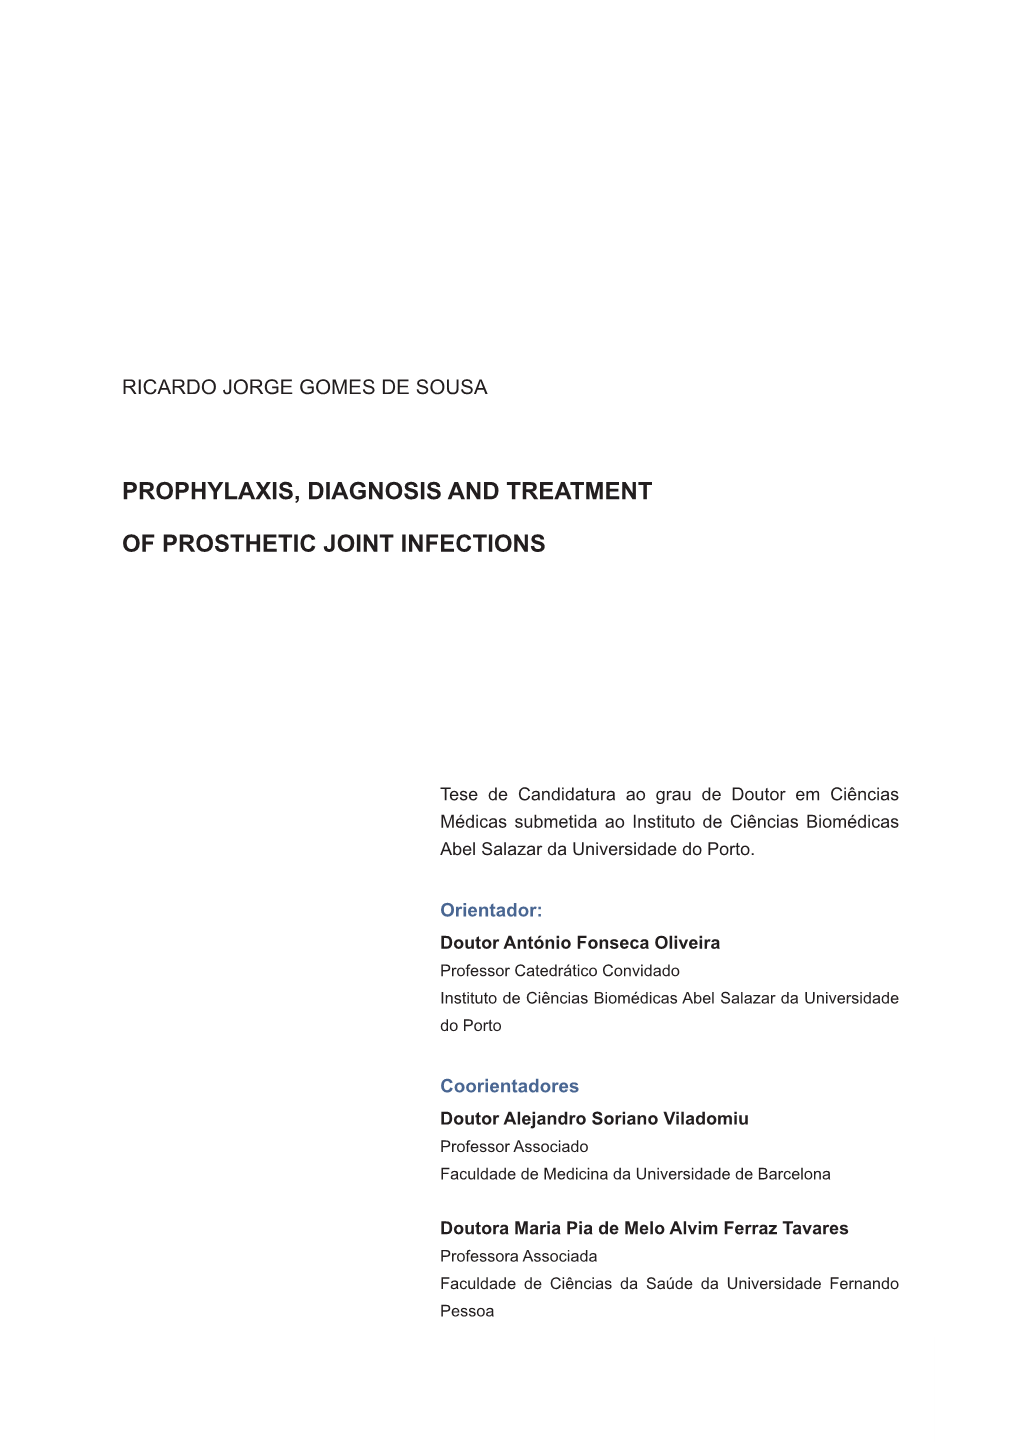 Prophylaxis, Diagnosis and Treatment of Prosthetic Joint Infections